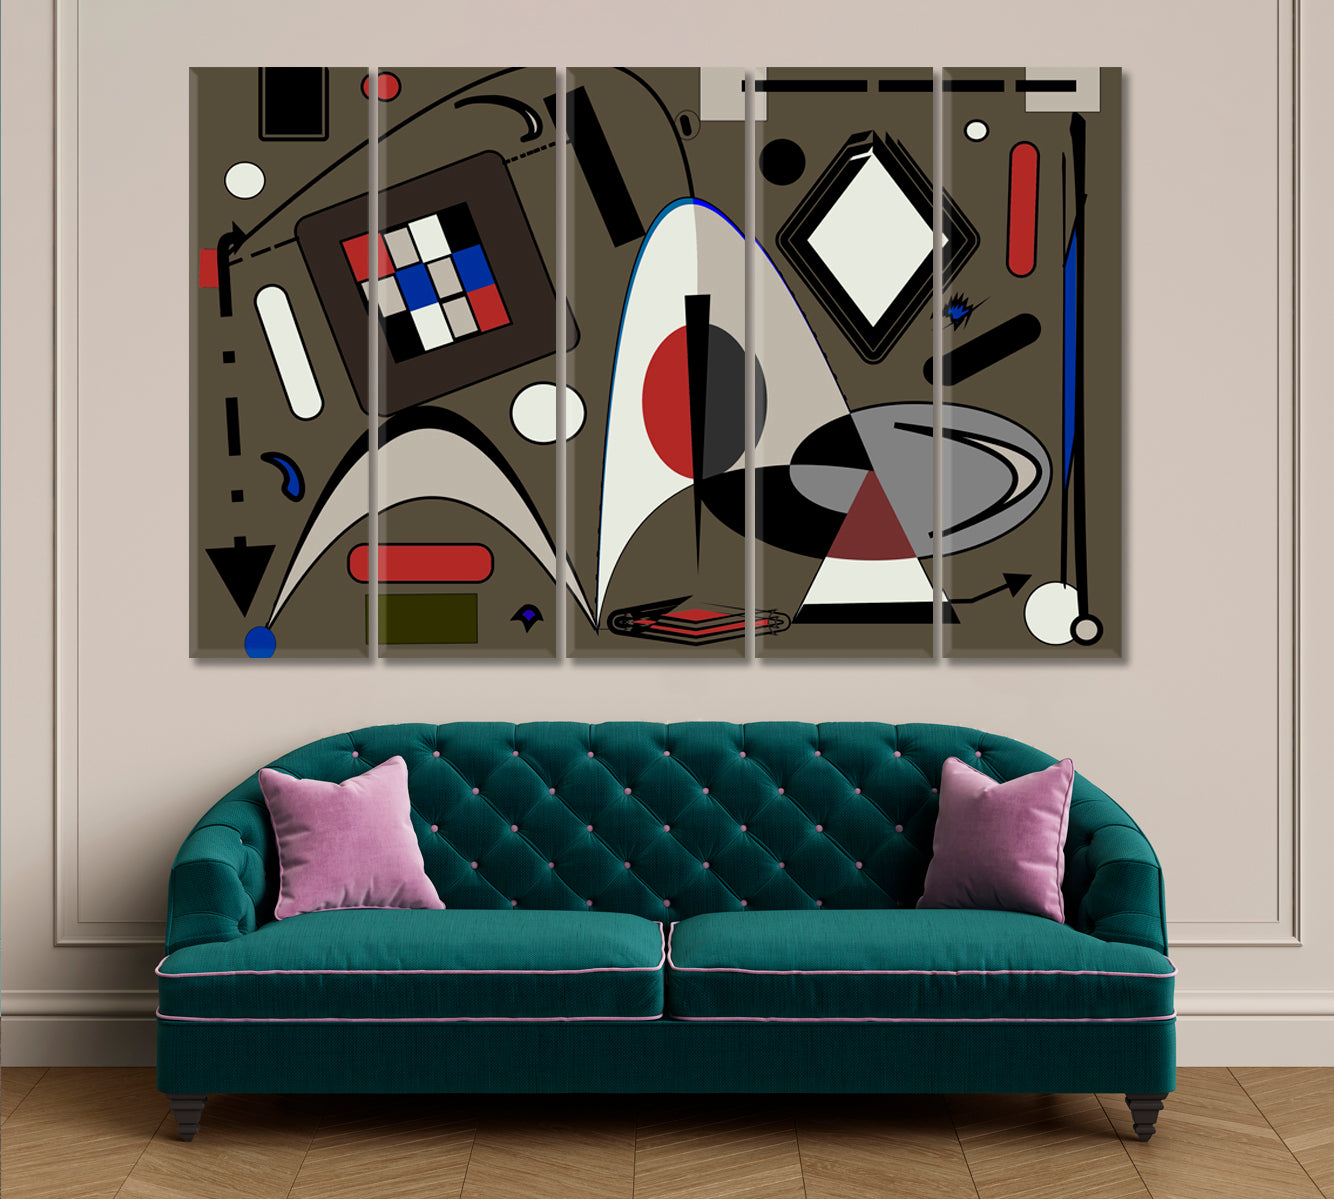 KANDINSKY WORLD Fancy Curved Geometric Shapes Red Brown Tones Abstract Art Print Artesty 5 panels 36" x 24" 